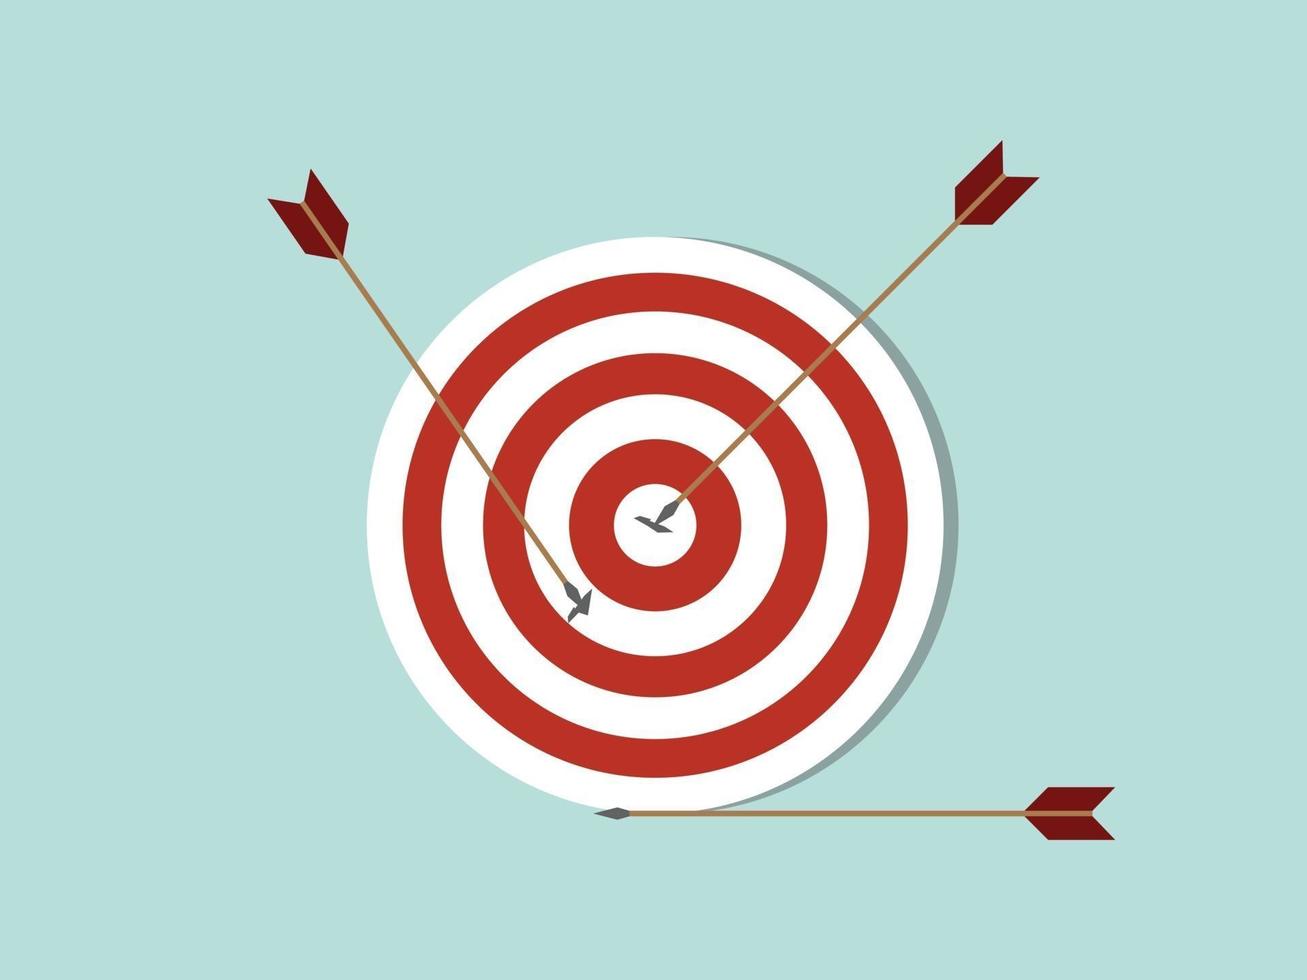 dart goals target business concept icon with arrow spread on target and off target with flat style - vector